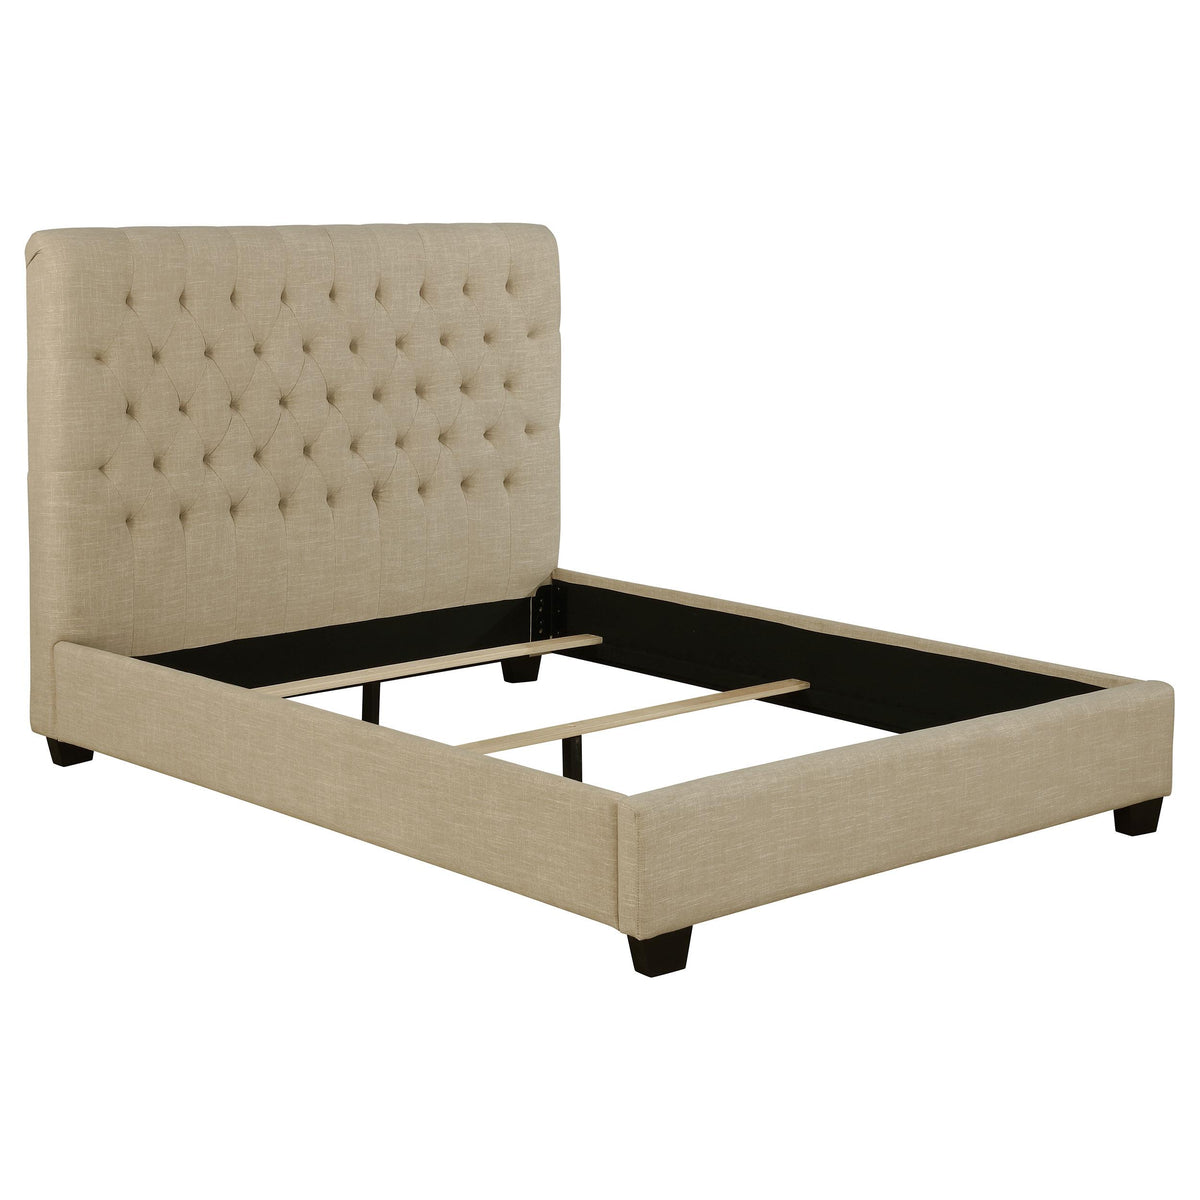 Chloe Tufted Upholstered California King Bed Oatmeal Chloe Tufted Upholstered California King Bed Oatmeal Half Price Furniture